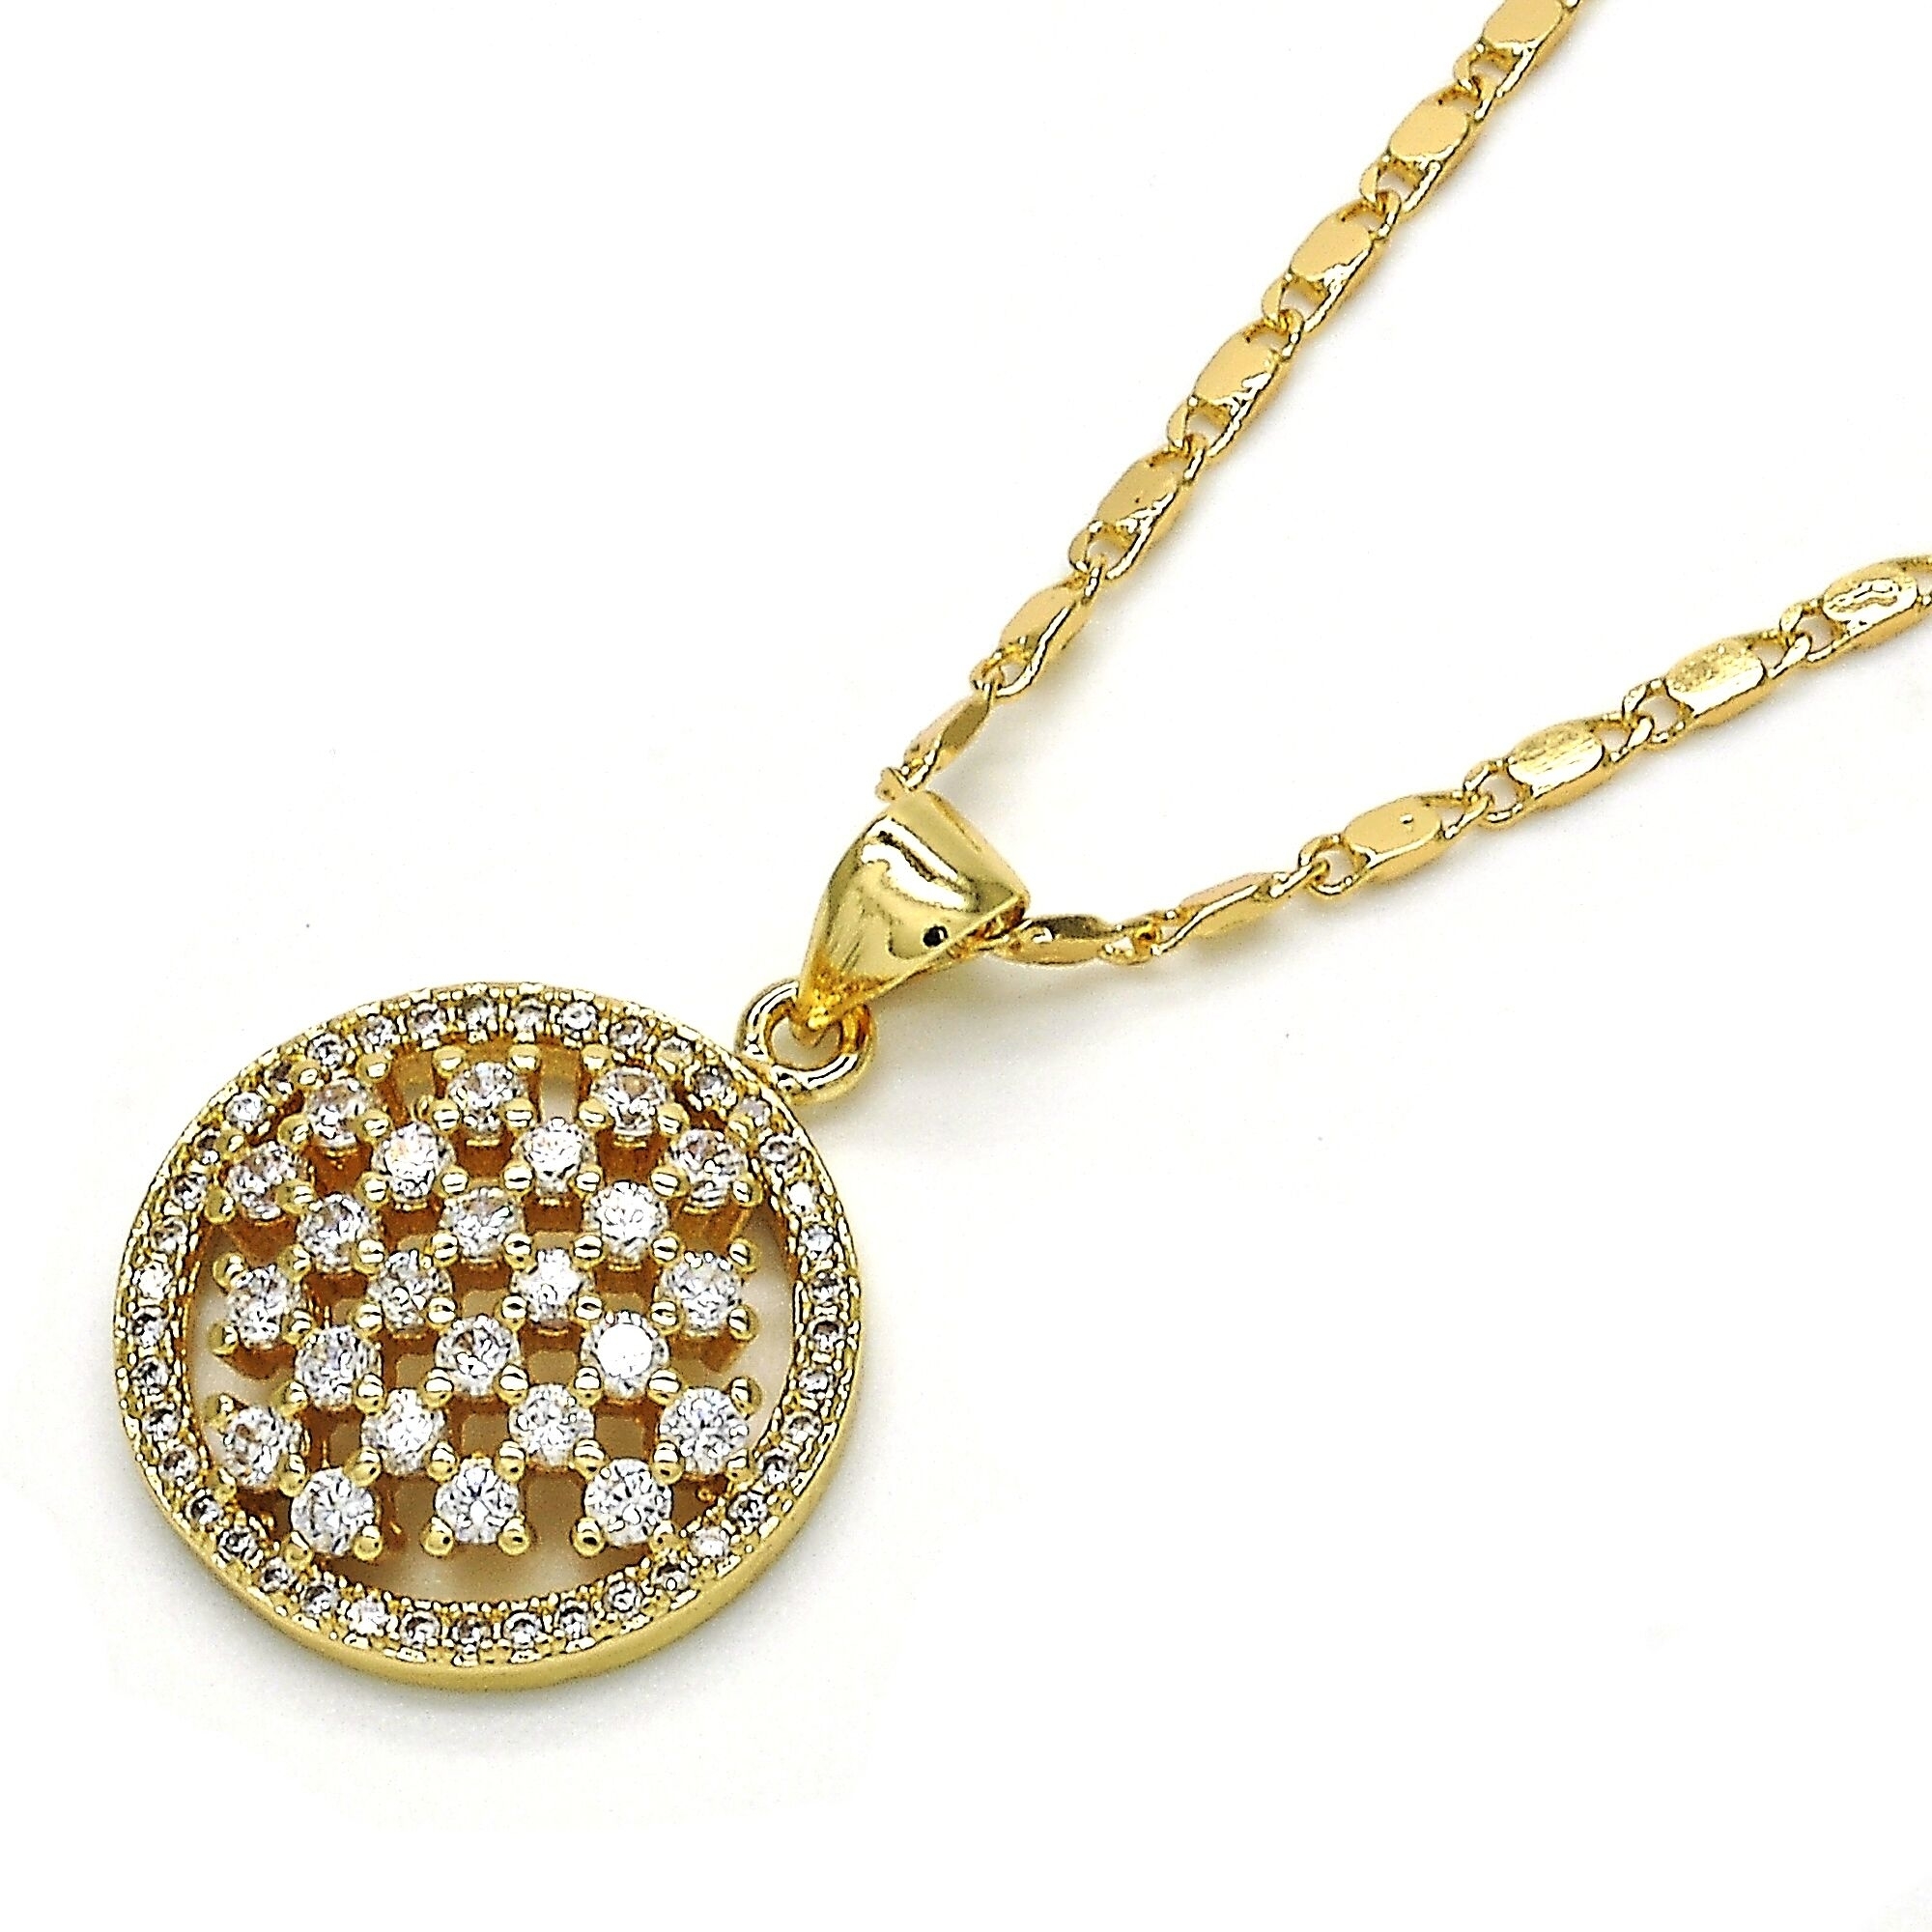 GOLD Filled High Polish Finsh PENDANT NECKLACE WITH DIAMOND ACCENT